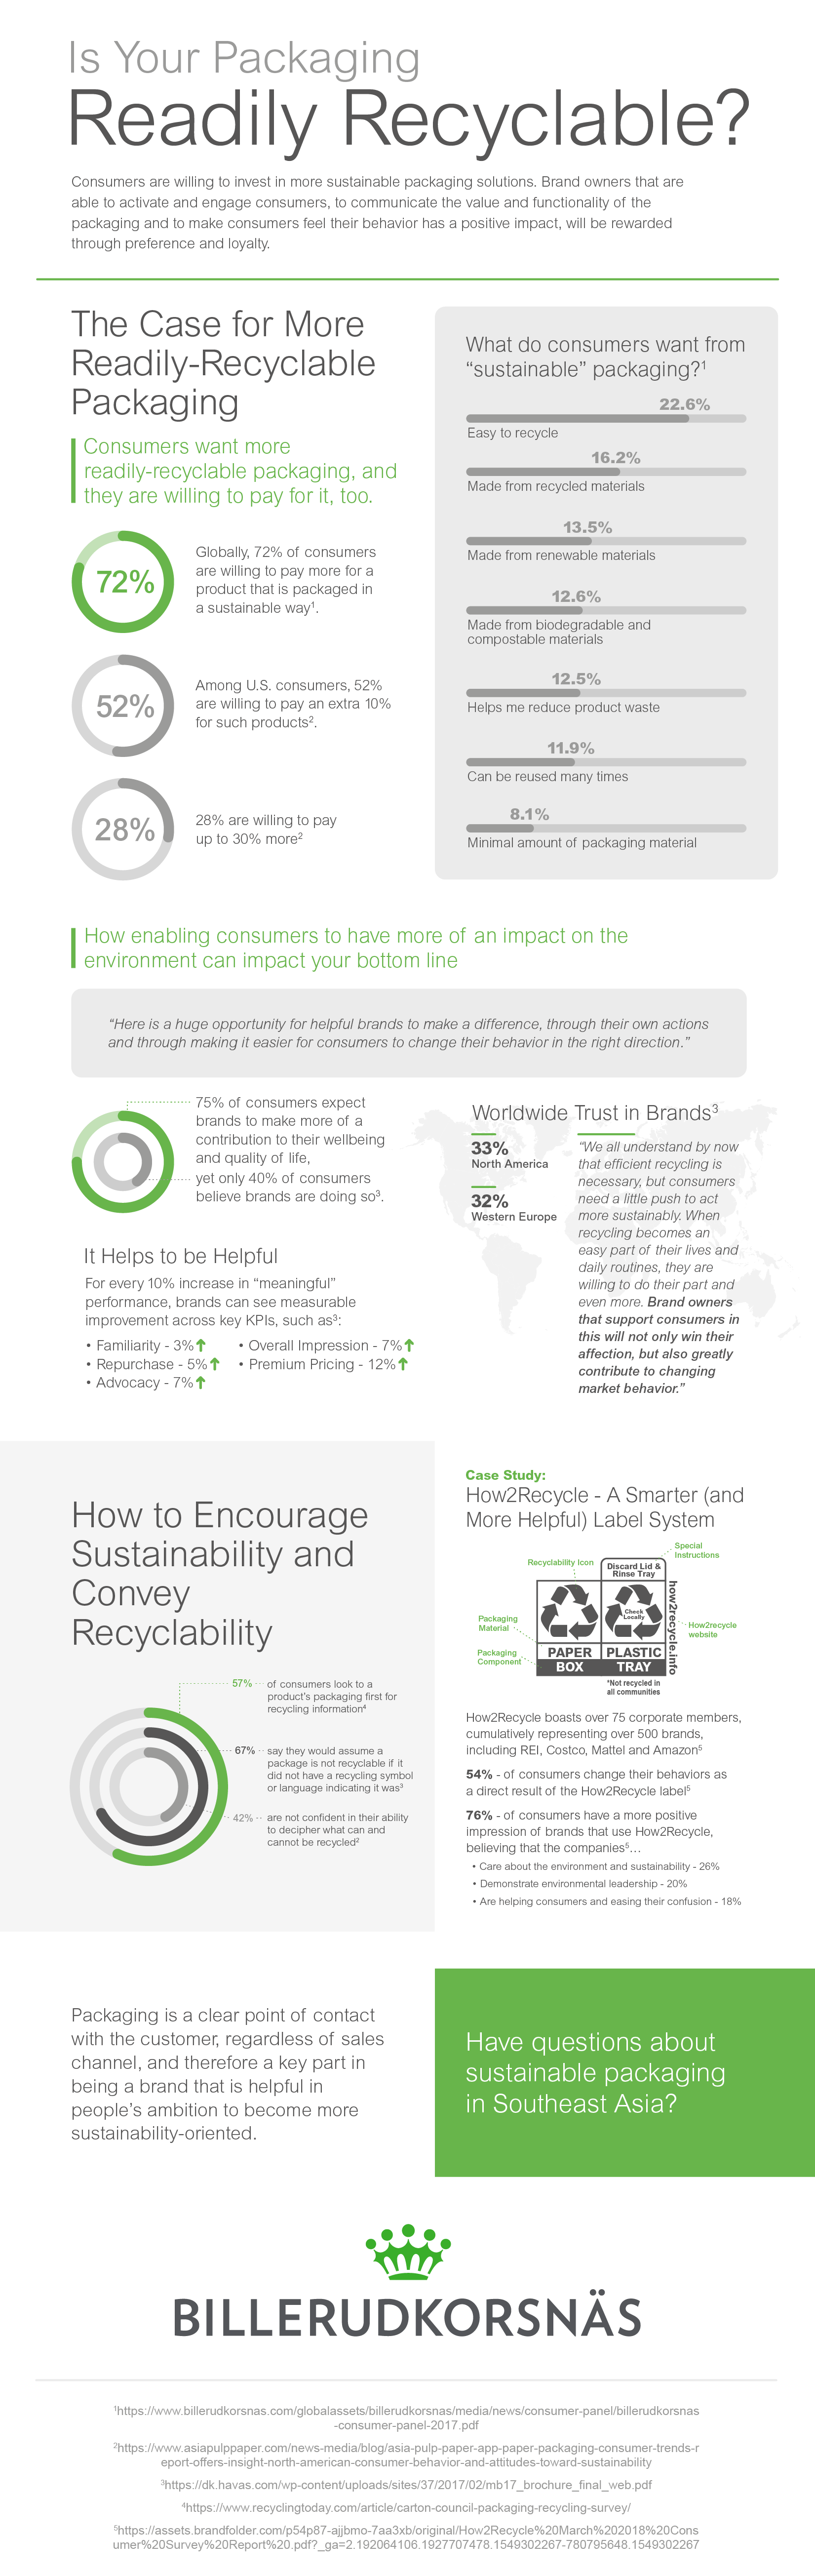 Is Your Packaing readily Recyclable Infographic